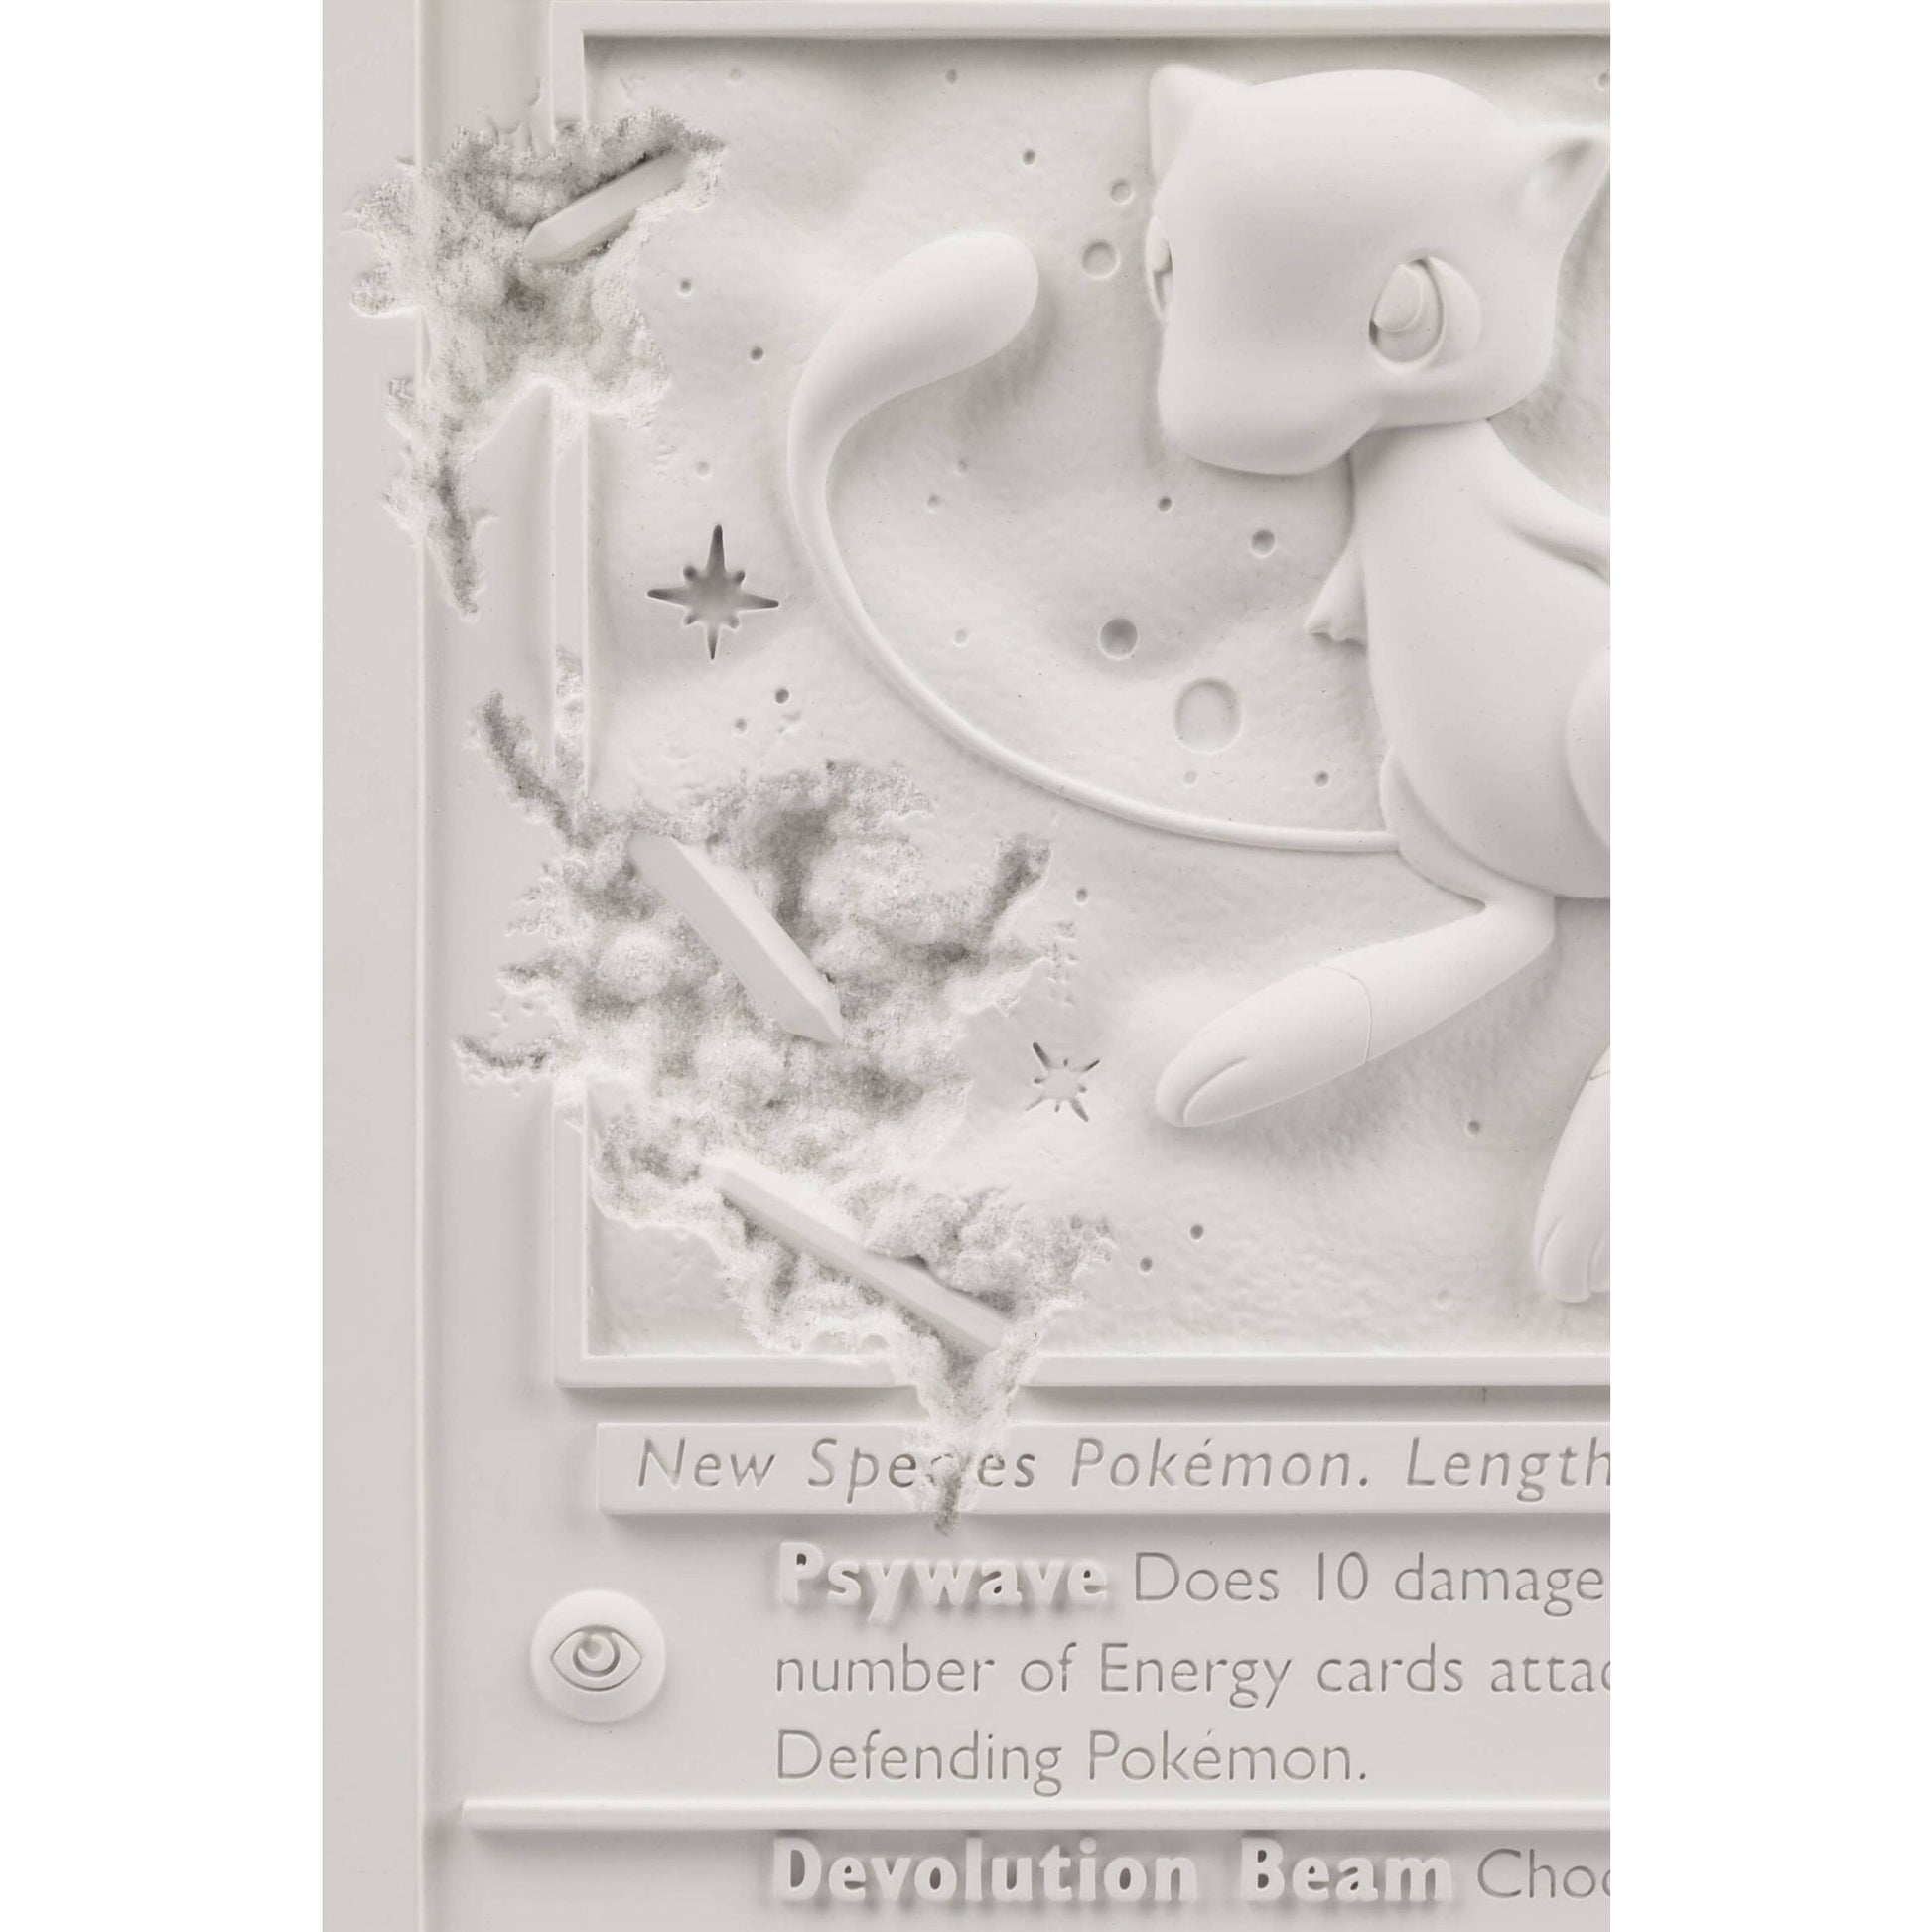 Daniel Arsham x Pokemon Crystalized Mew Card, 2022 12 x 8.6 x 1 in / 5 lbs Edition of 500  WHITE CRYSTALIZED MEW CARD is a sculpture modeled after the 1st edition Mew Card in the Pokémon Trading Card Game. It has been reimagined as a monument of Kanto uncovered through the passage of time. This edition, made of white cast resin and crystal dust, is a scaled down version of larger work made in Arsham Studio.